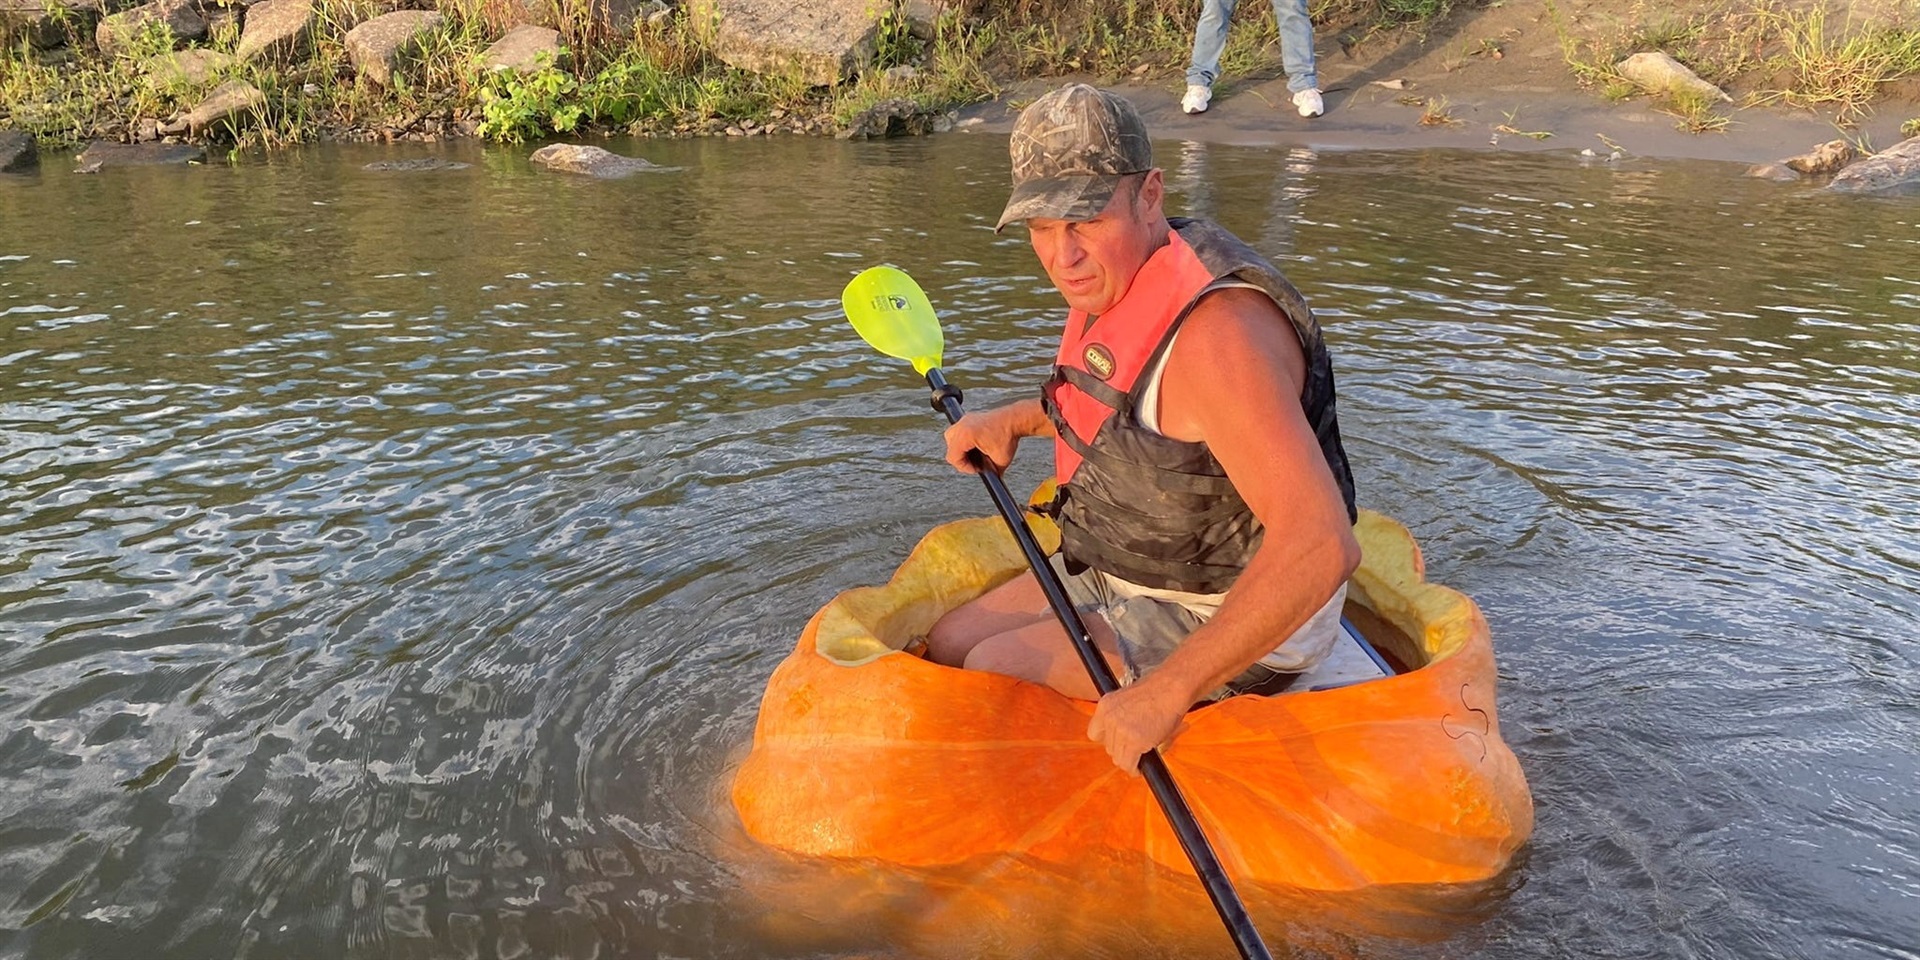 A man floats down the Missouri river in a giant hollowed out pumpkin, in Be...